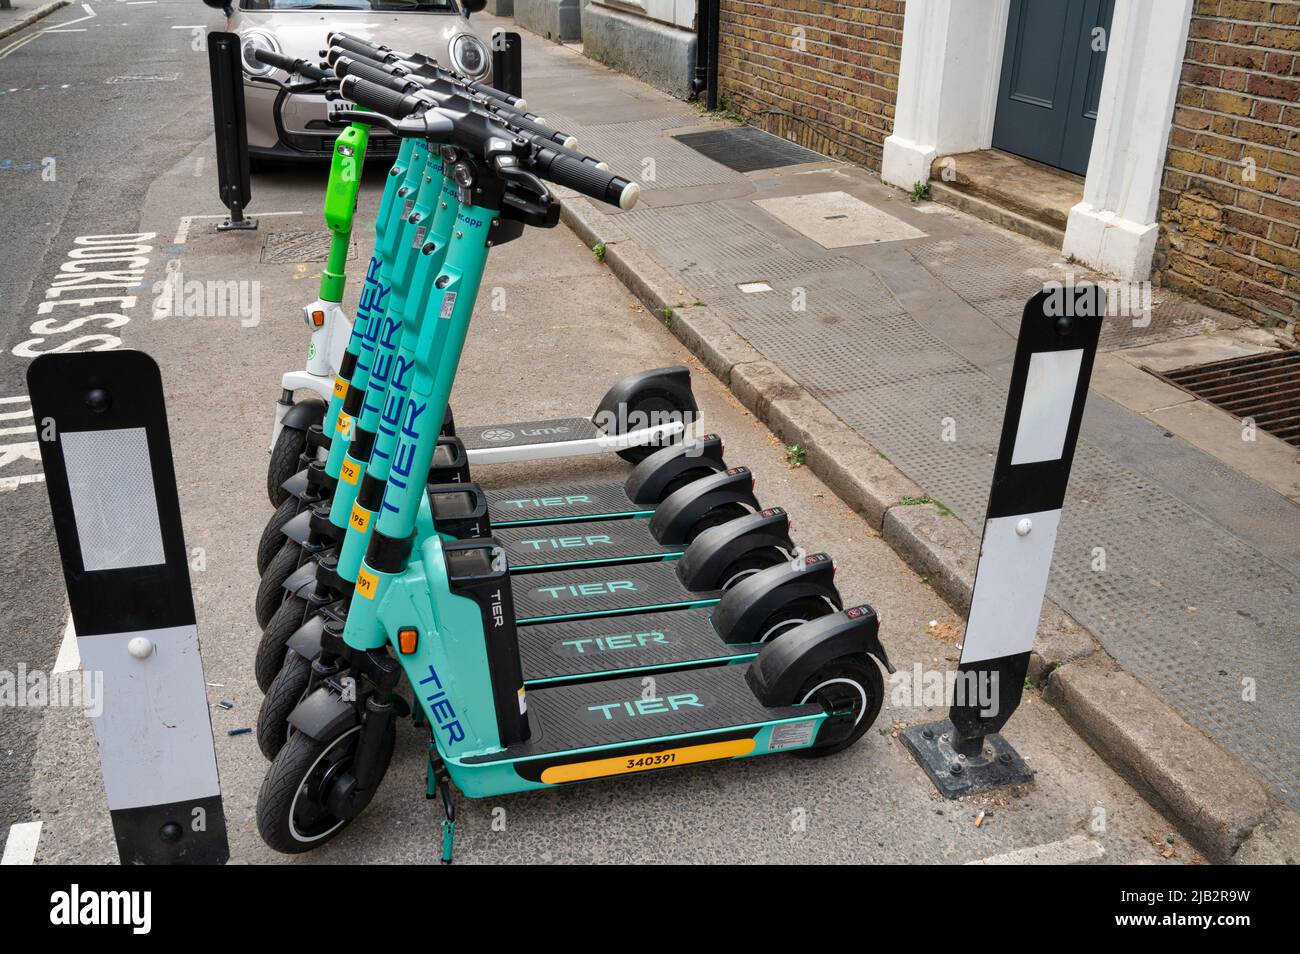 London, UK- May 3, 2022: Tier rental scooters lined up on a street in London Stock Photo